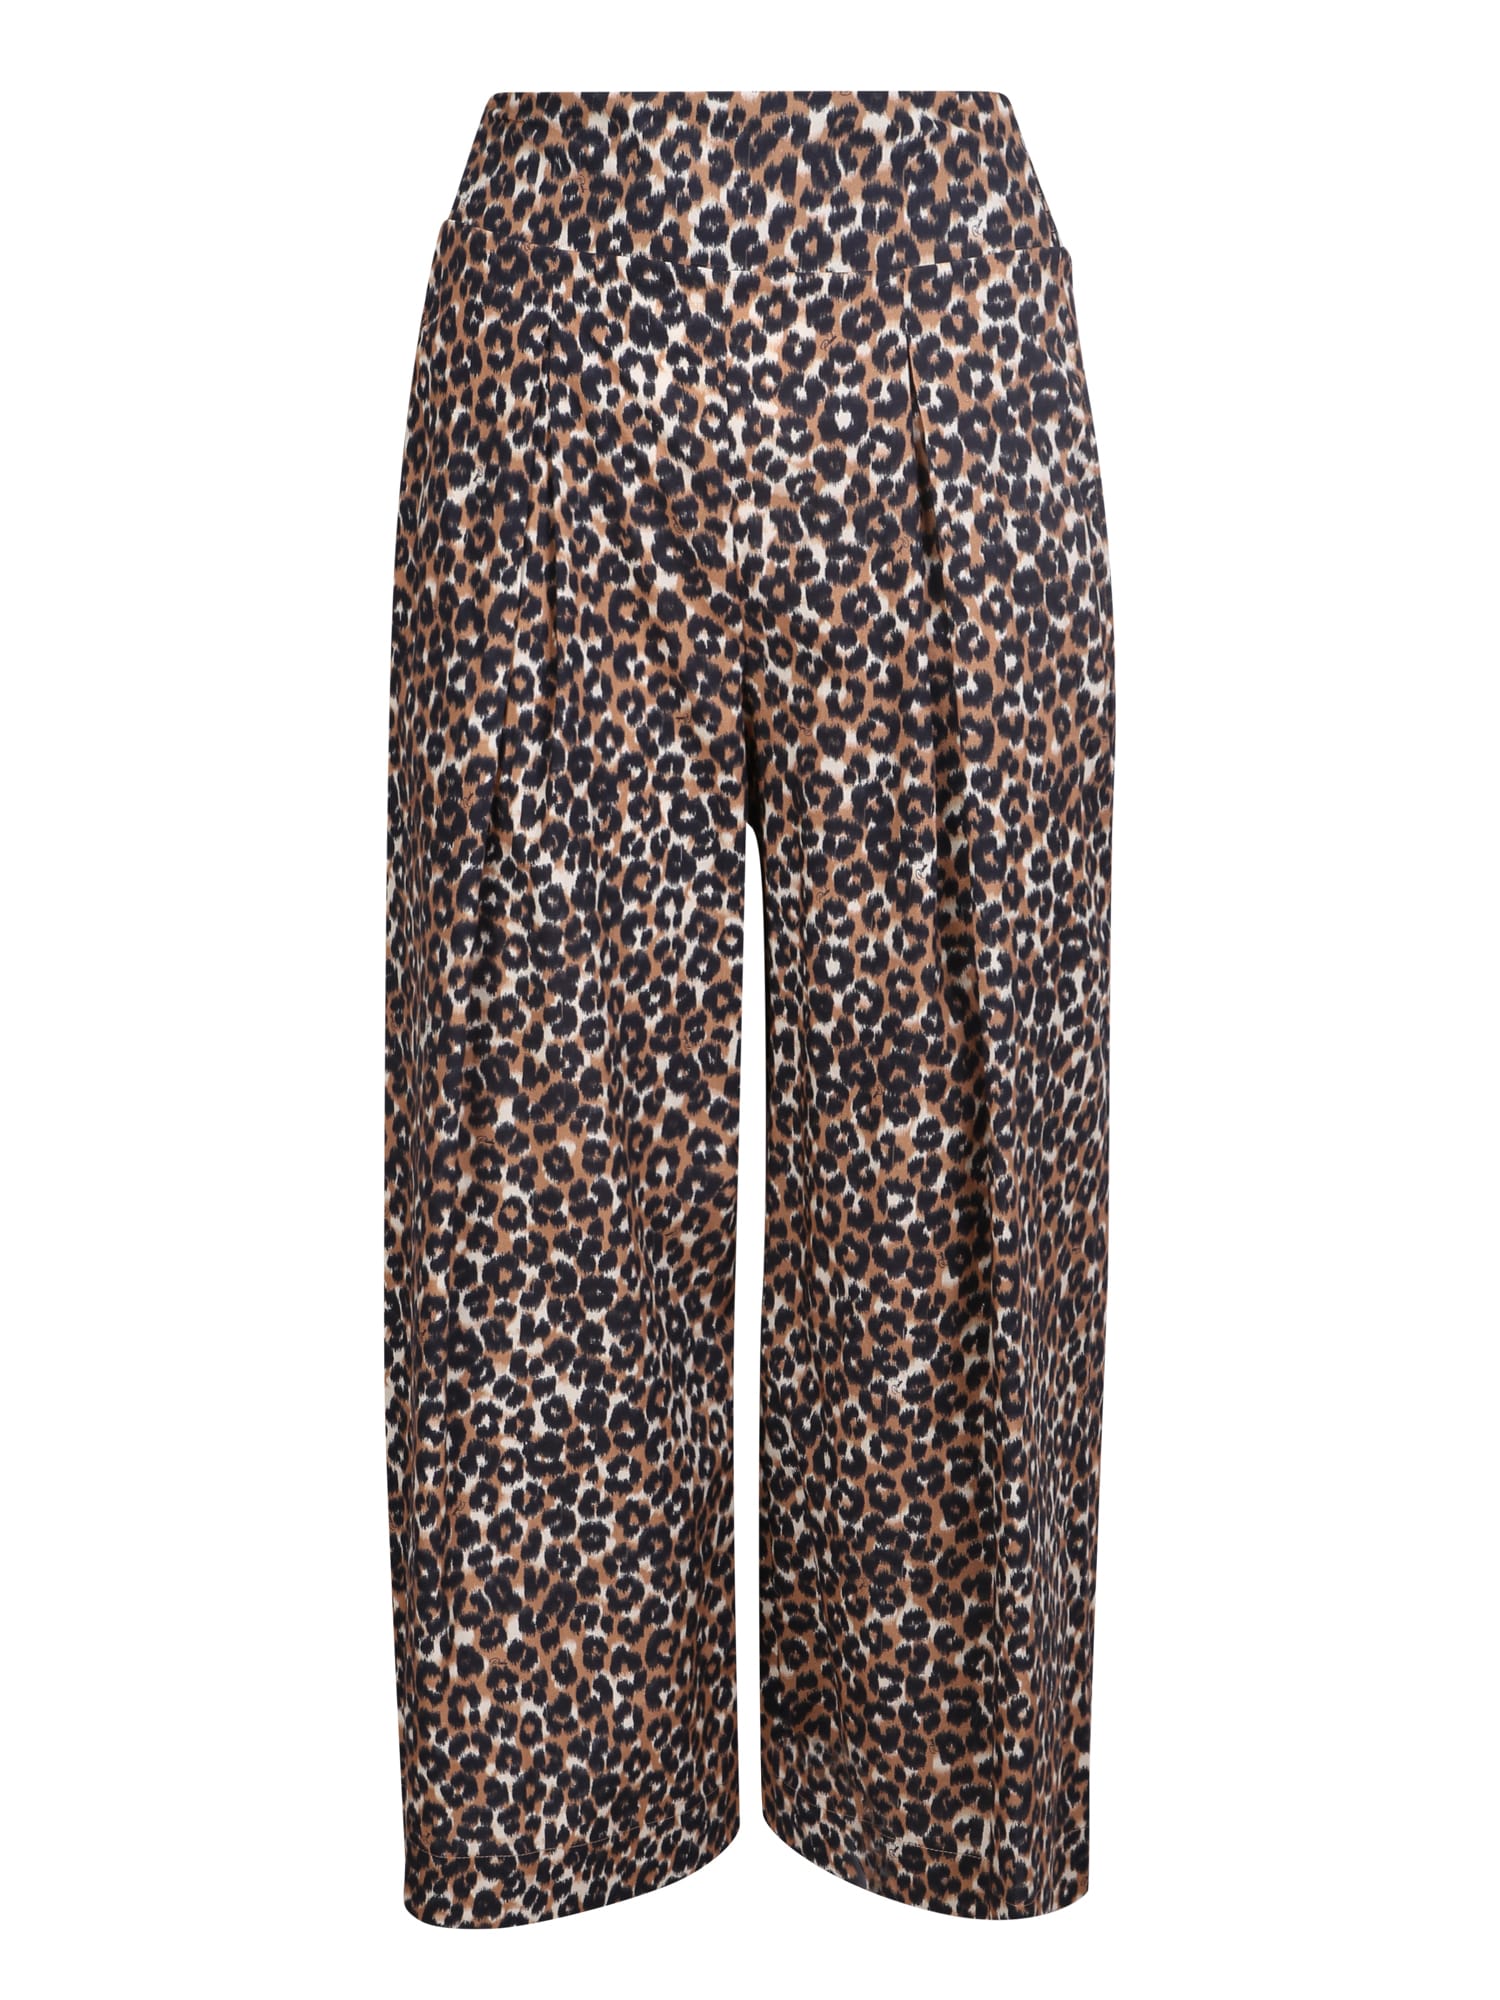 Pinko Leopard Print Cropped Trousers